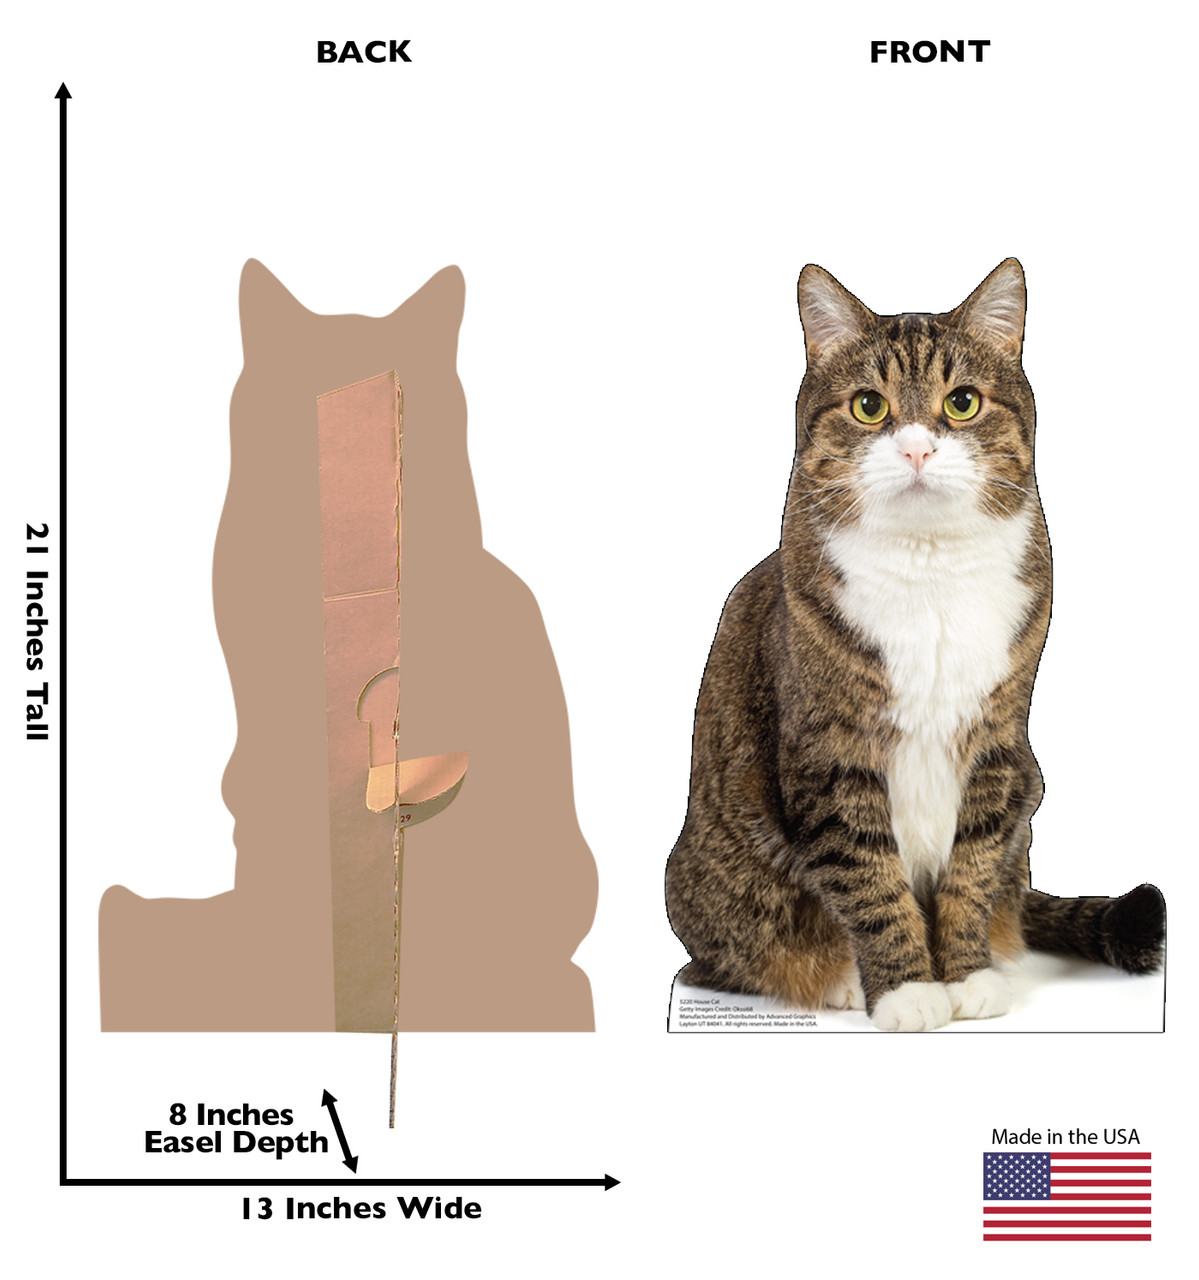 Life-size cardboard standee of a House Cat with back and front dimensions.